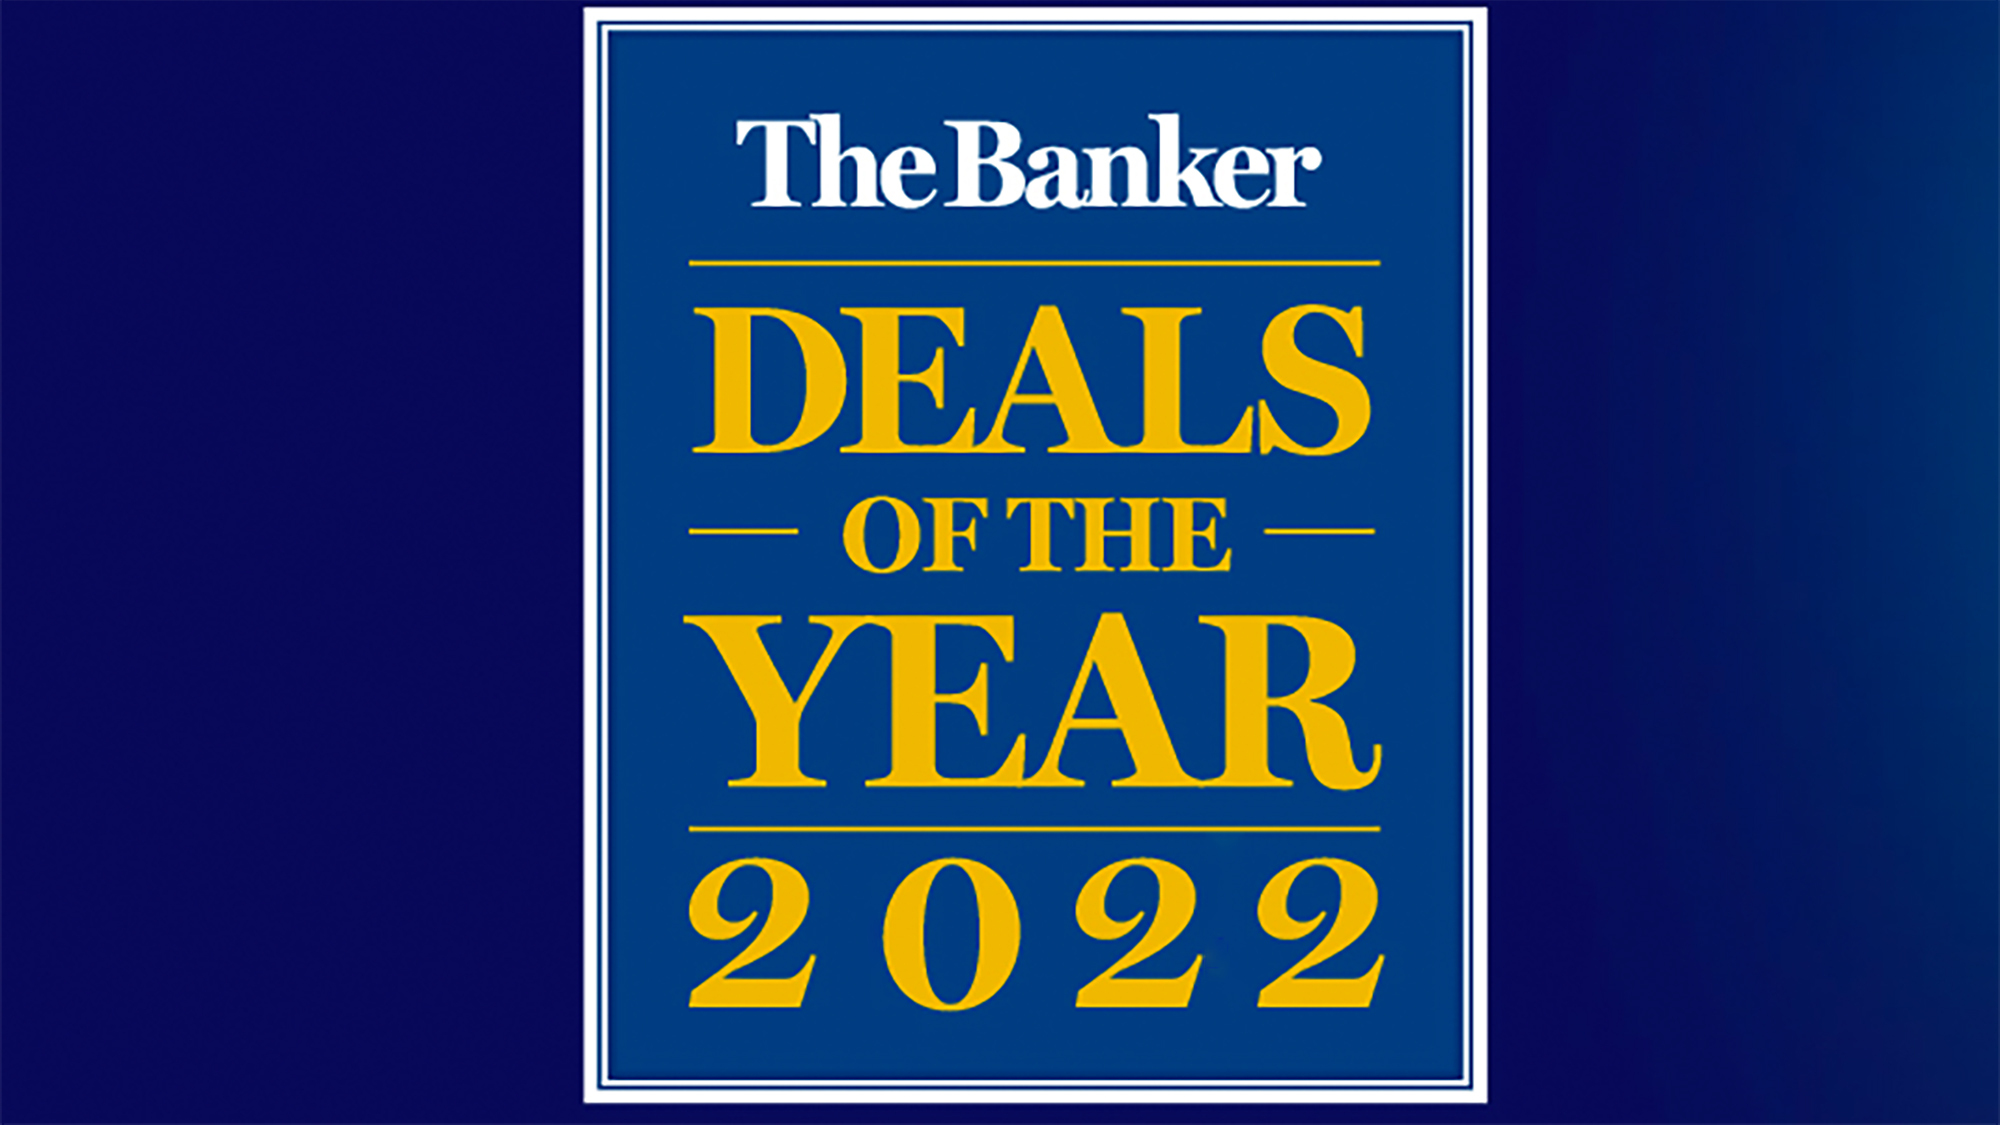 Deals of the year logo 2022